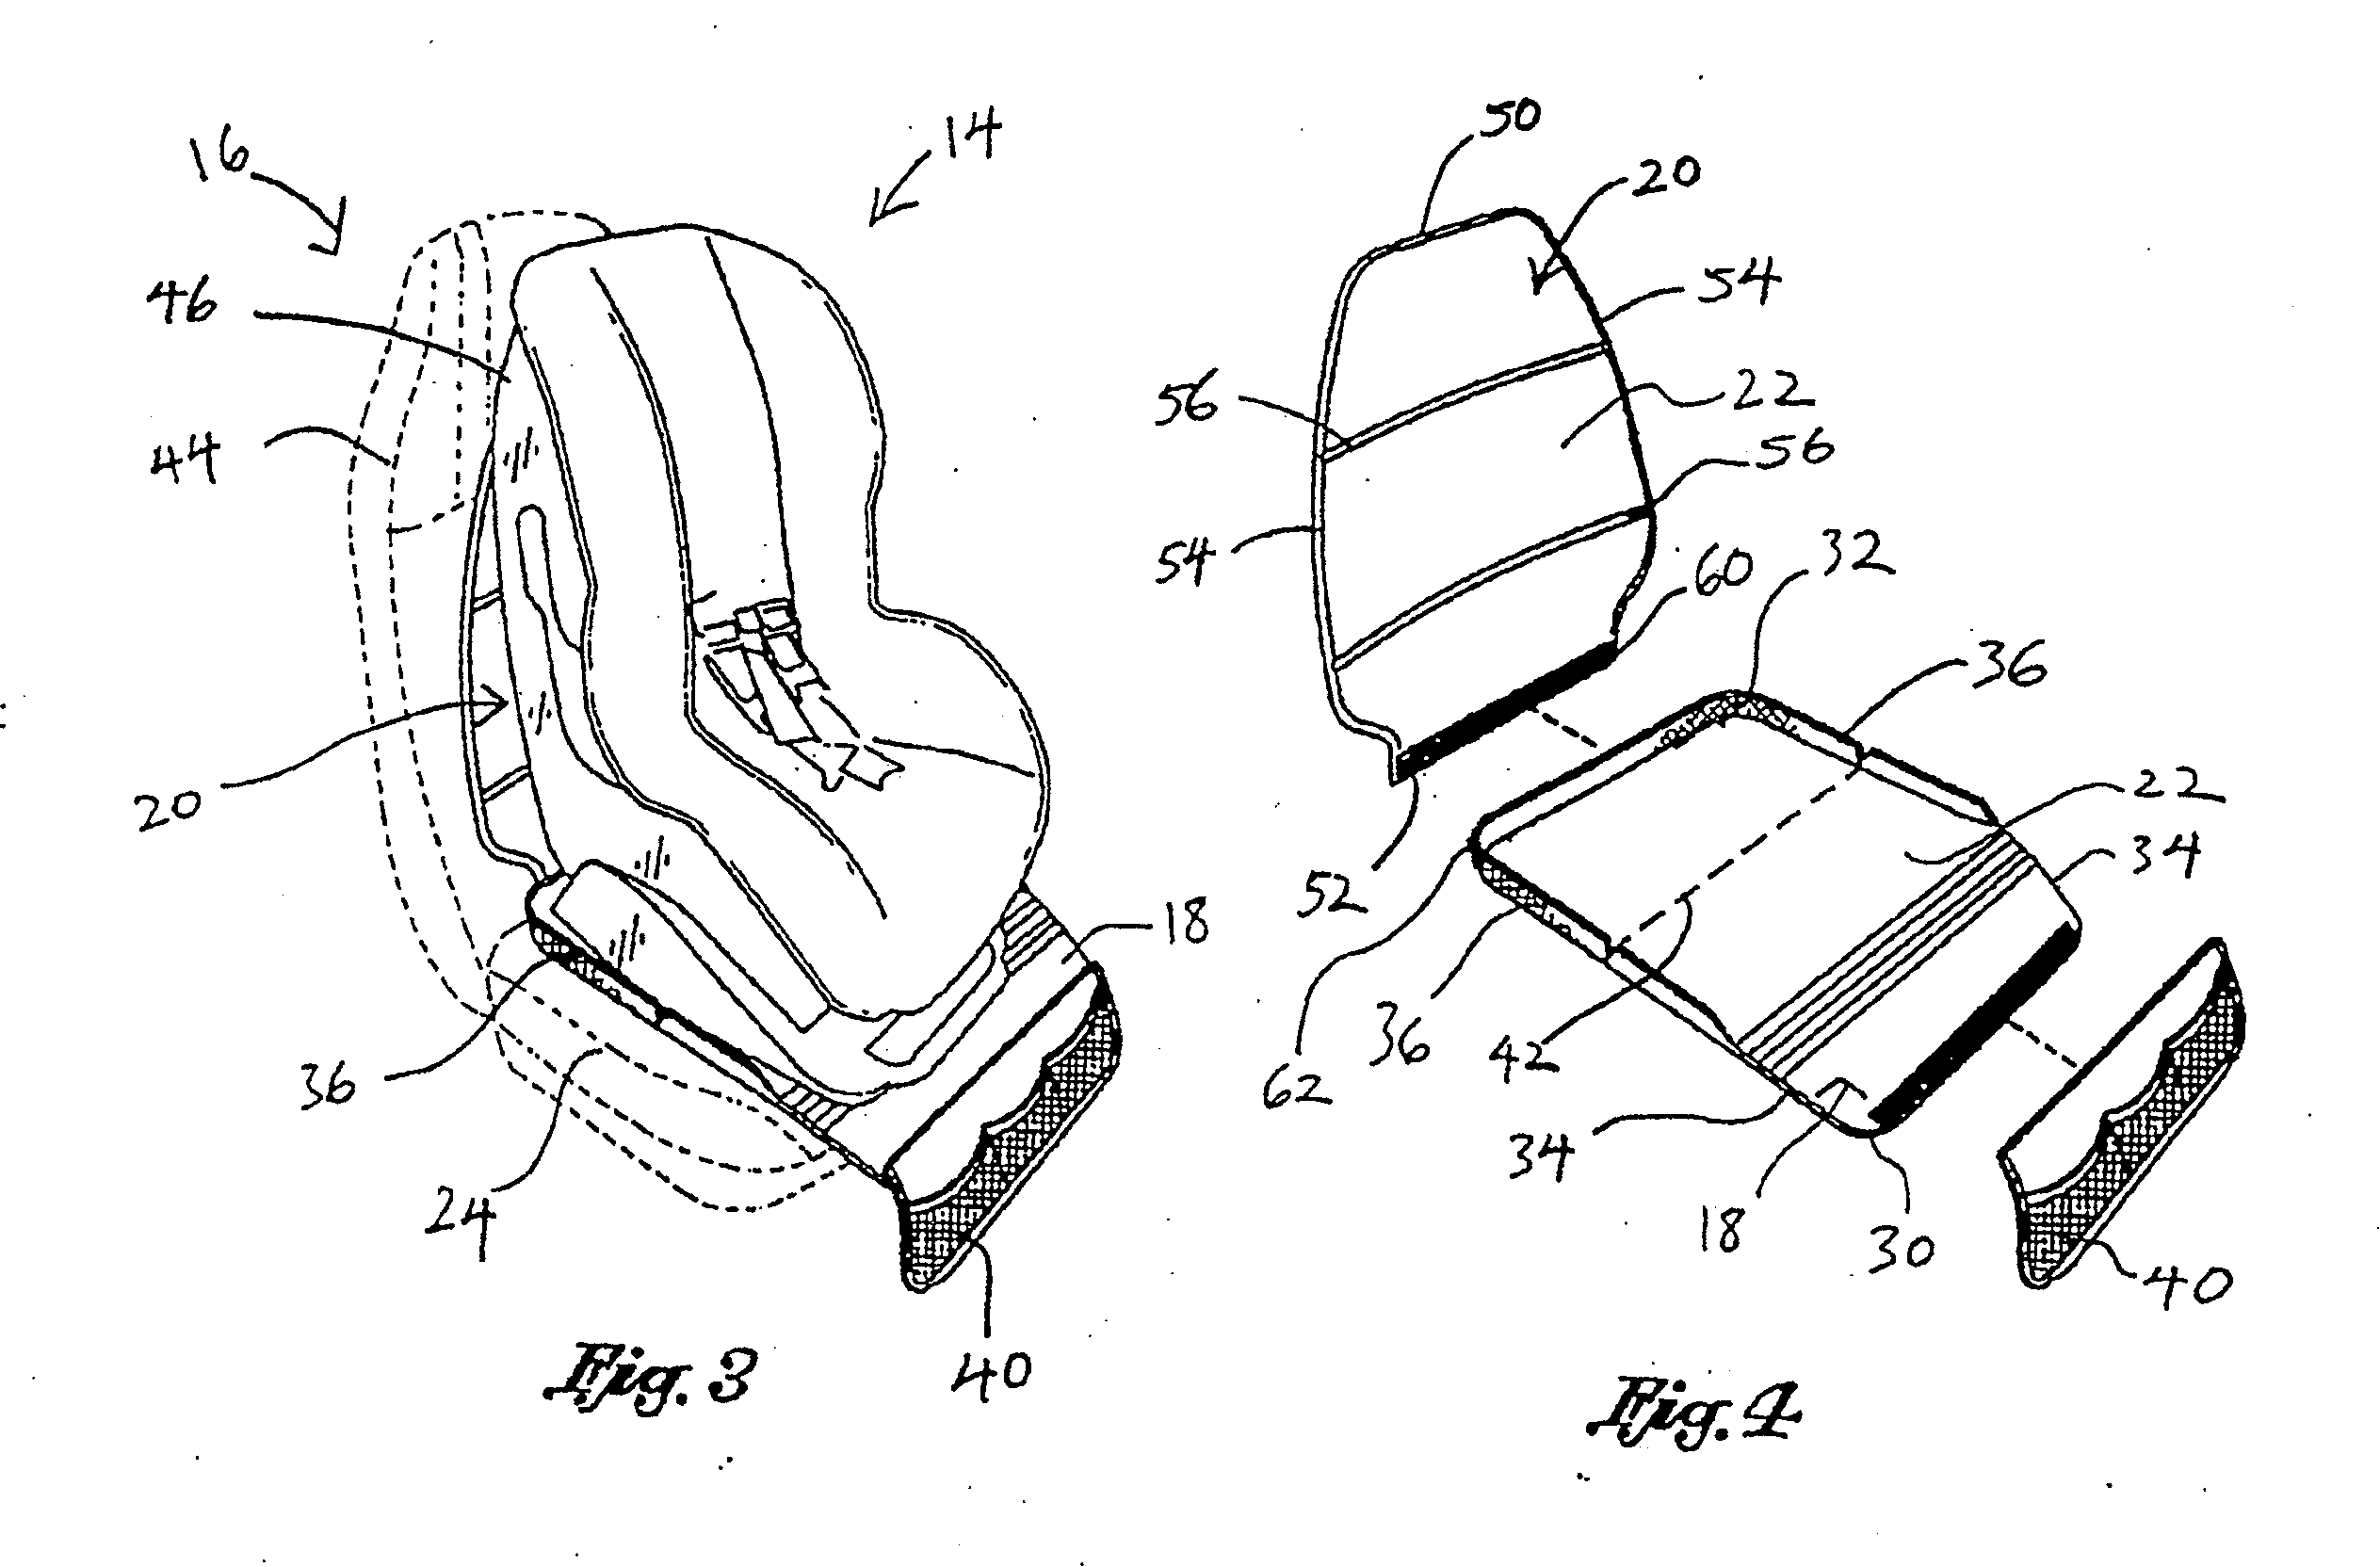 Two-stage protective car seat cover for child and infant safety chairs